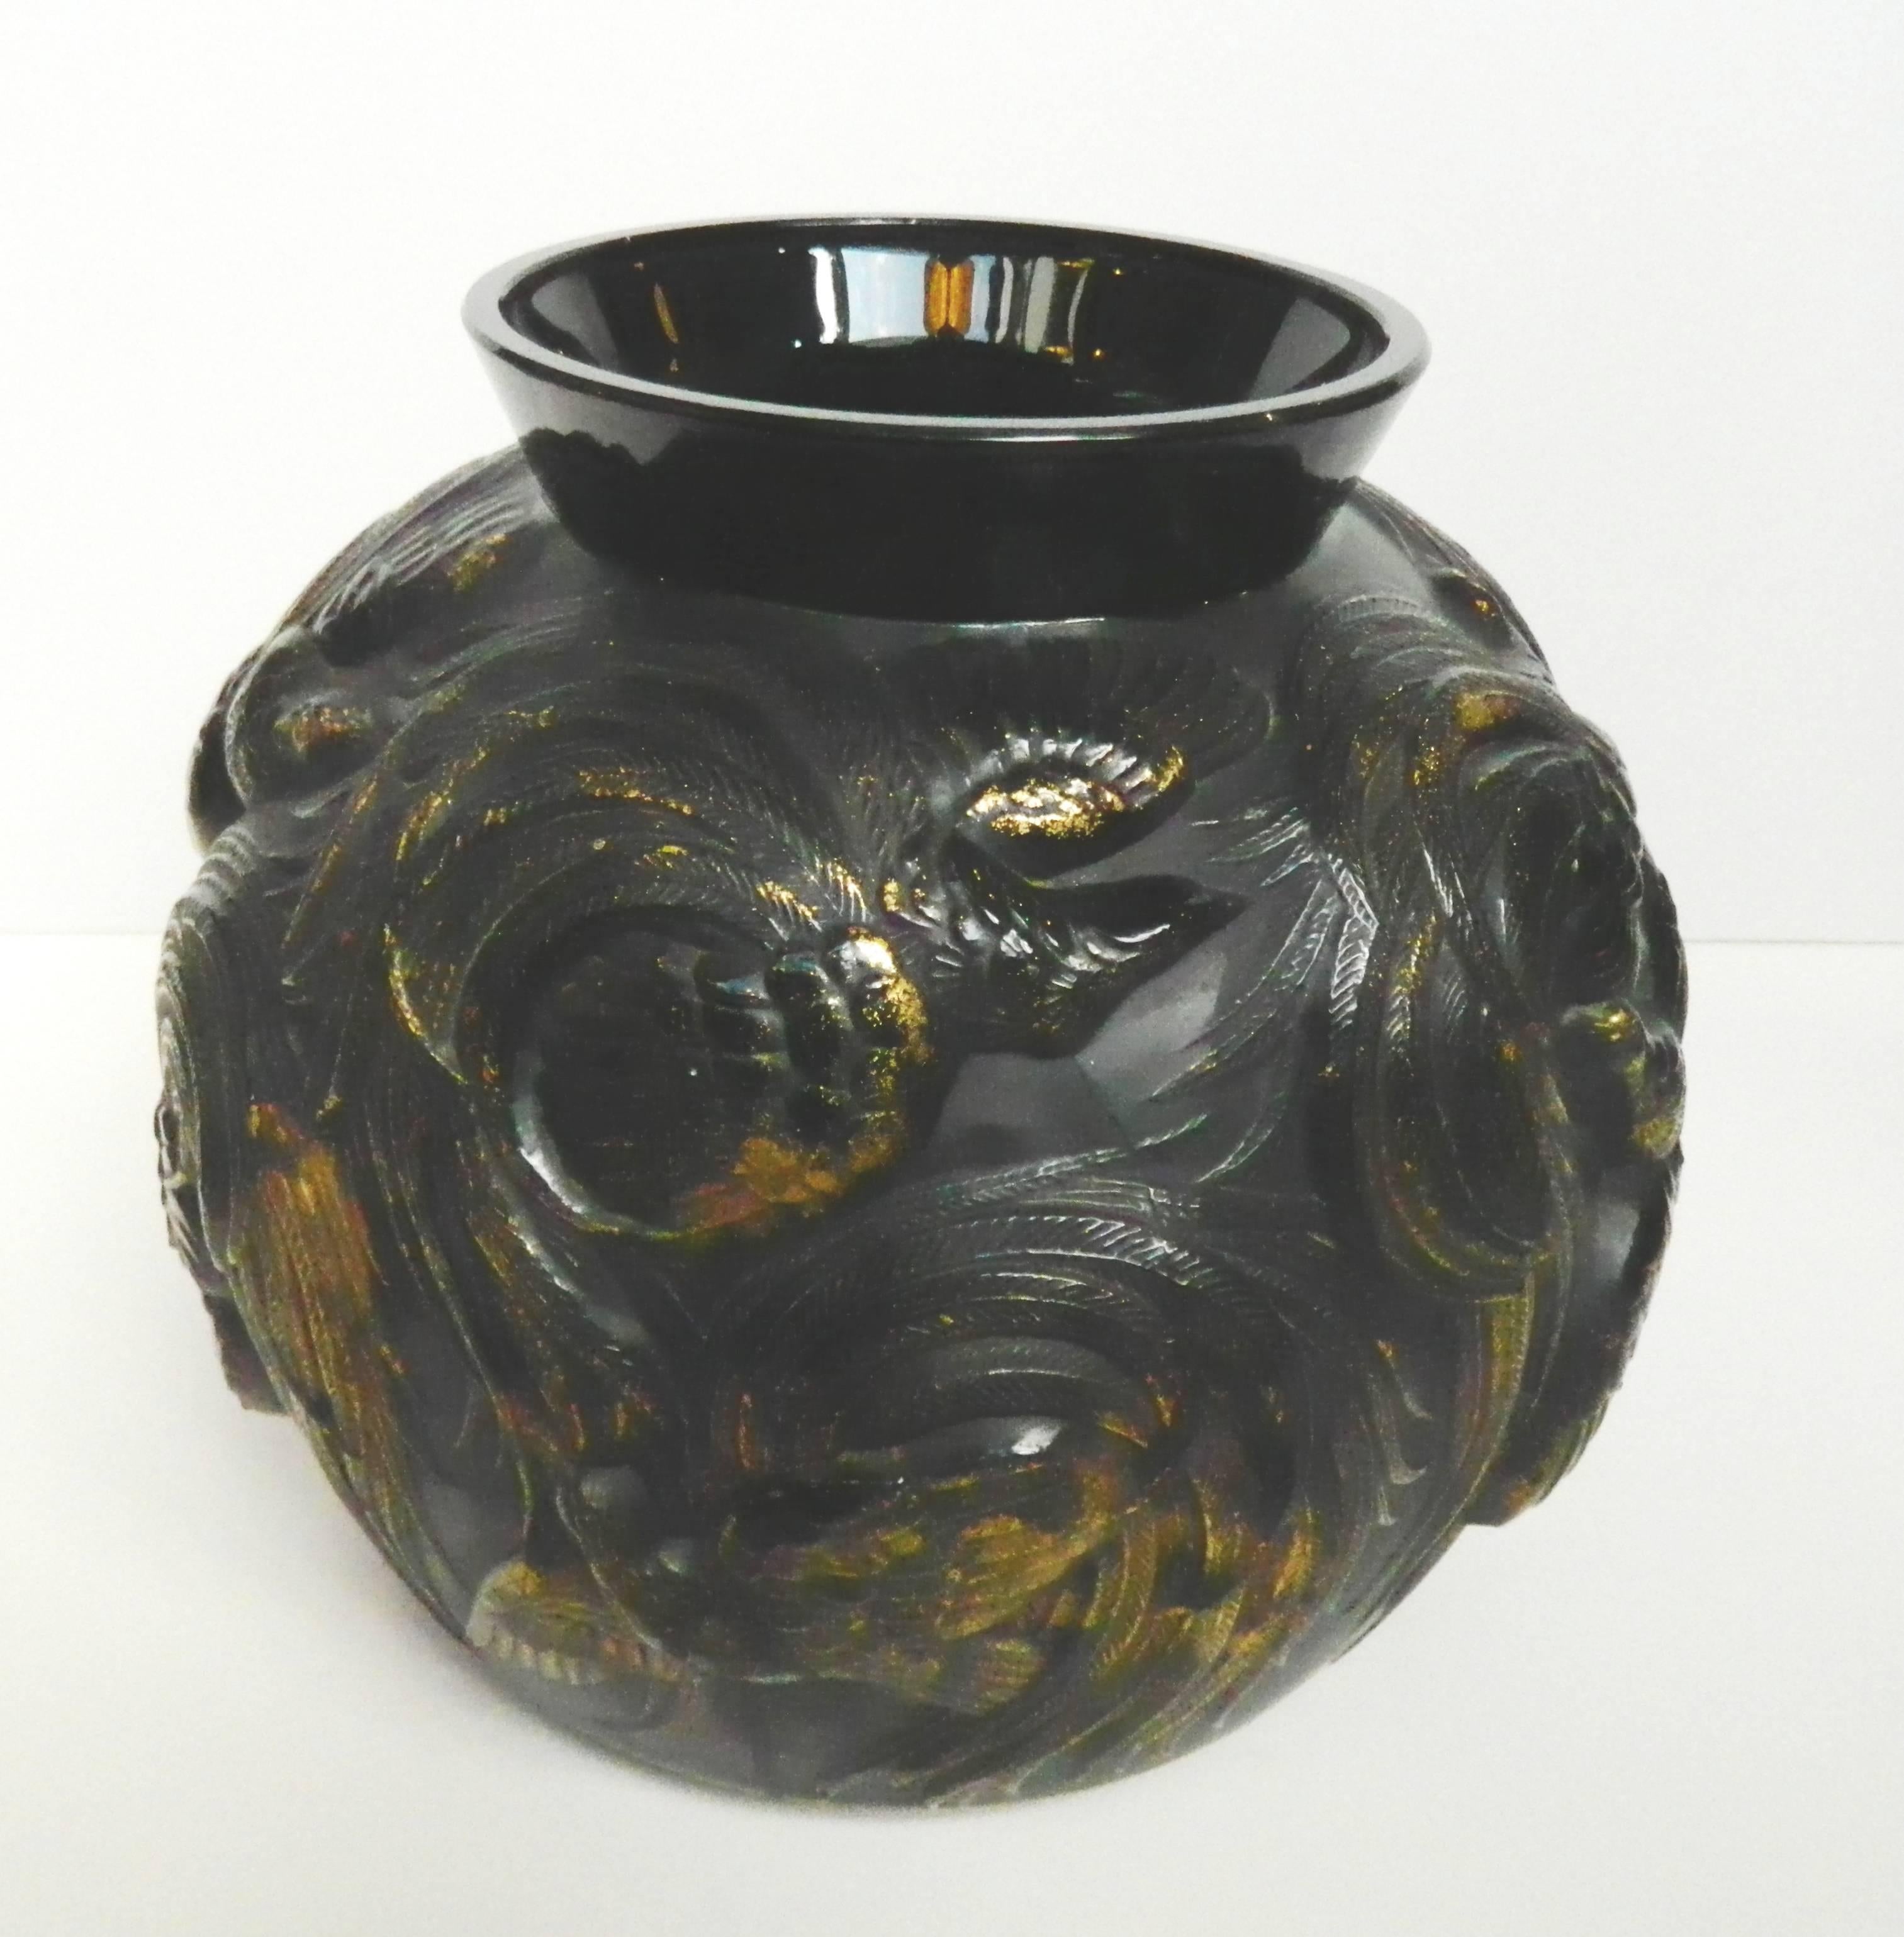 Huge French Sabino black glass vase molded with heavily raised swirling exotic tropical birds accented with gold highlights.
There is a large hand engraved script signature to the underside:
Sabino Paris made in France.

 